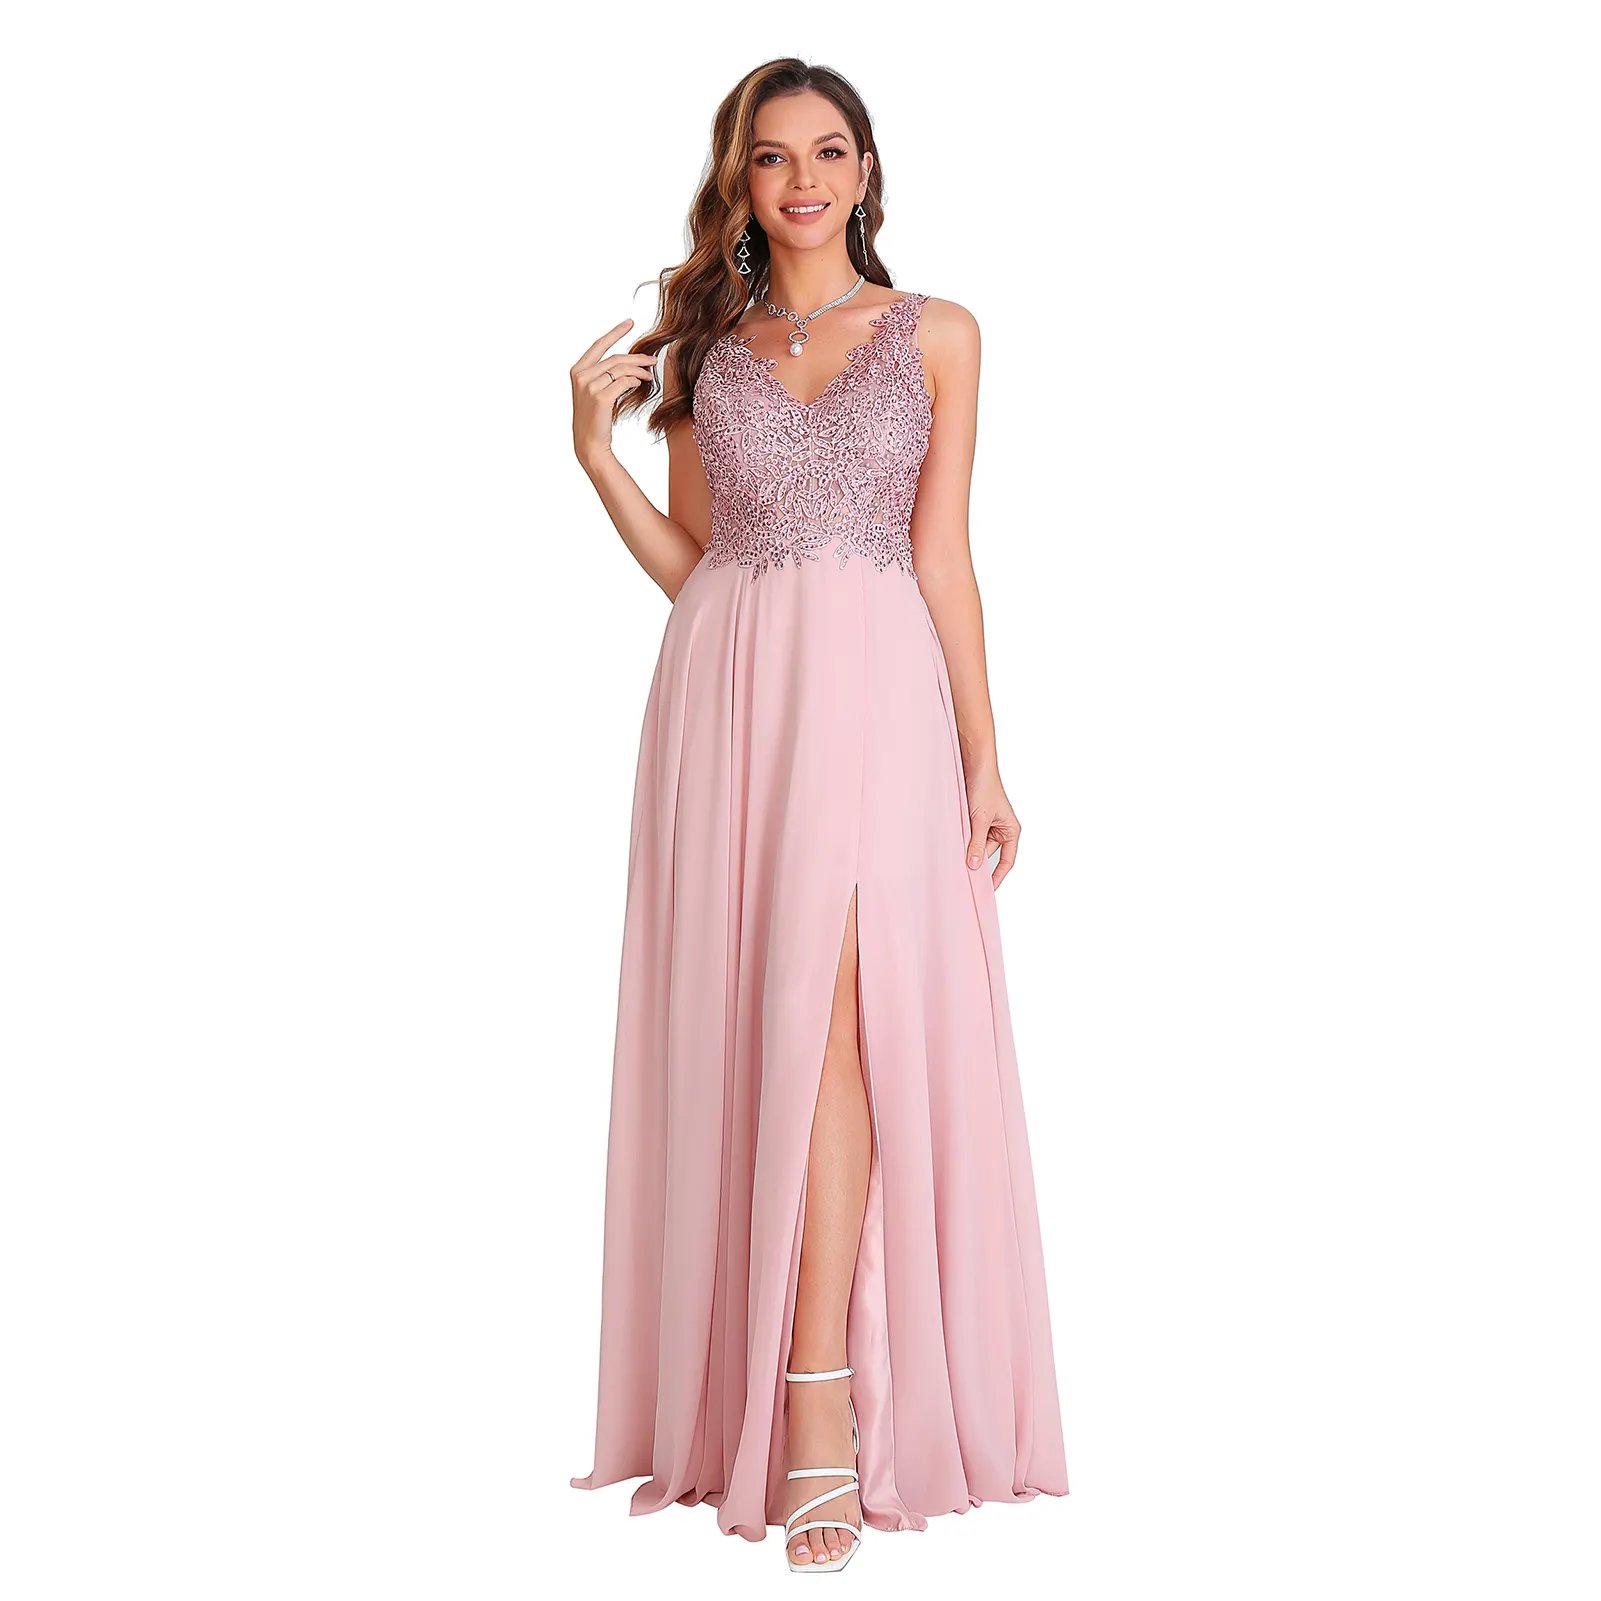 Elegant Ladies party sleeveless long slit dress flower lace with bead Chiffon prom gown evening High quality dress